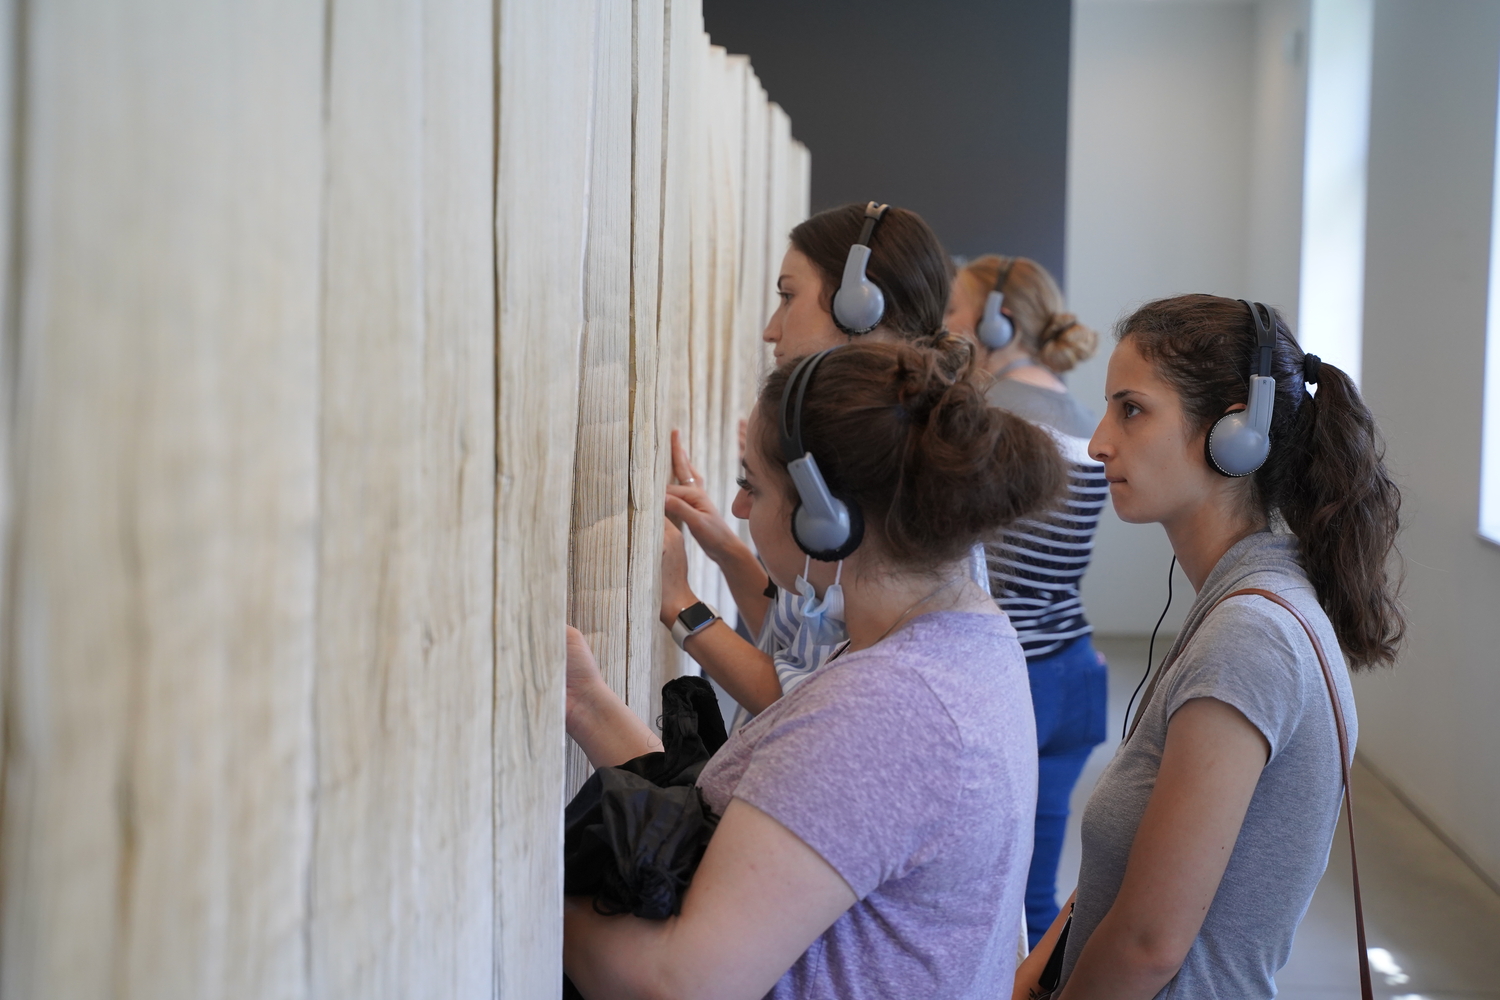 A group of students looks at the Book of Names exhibit